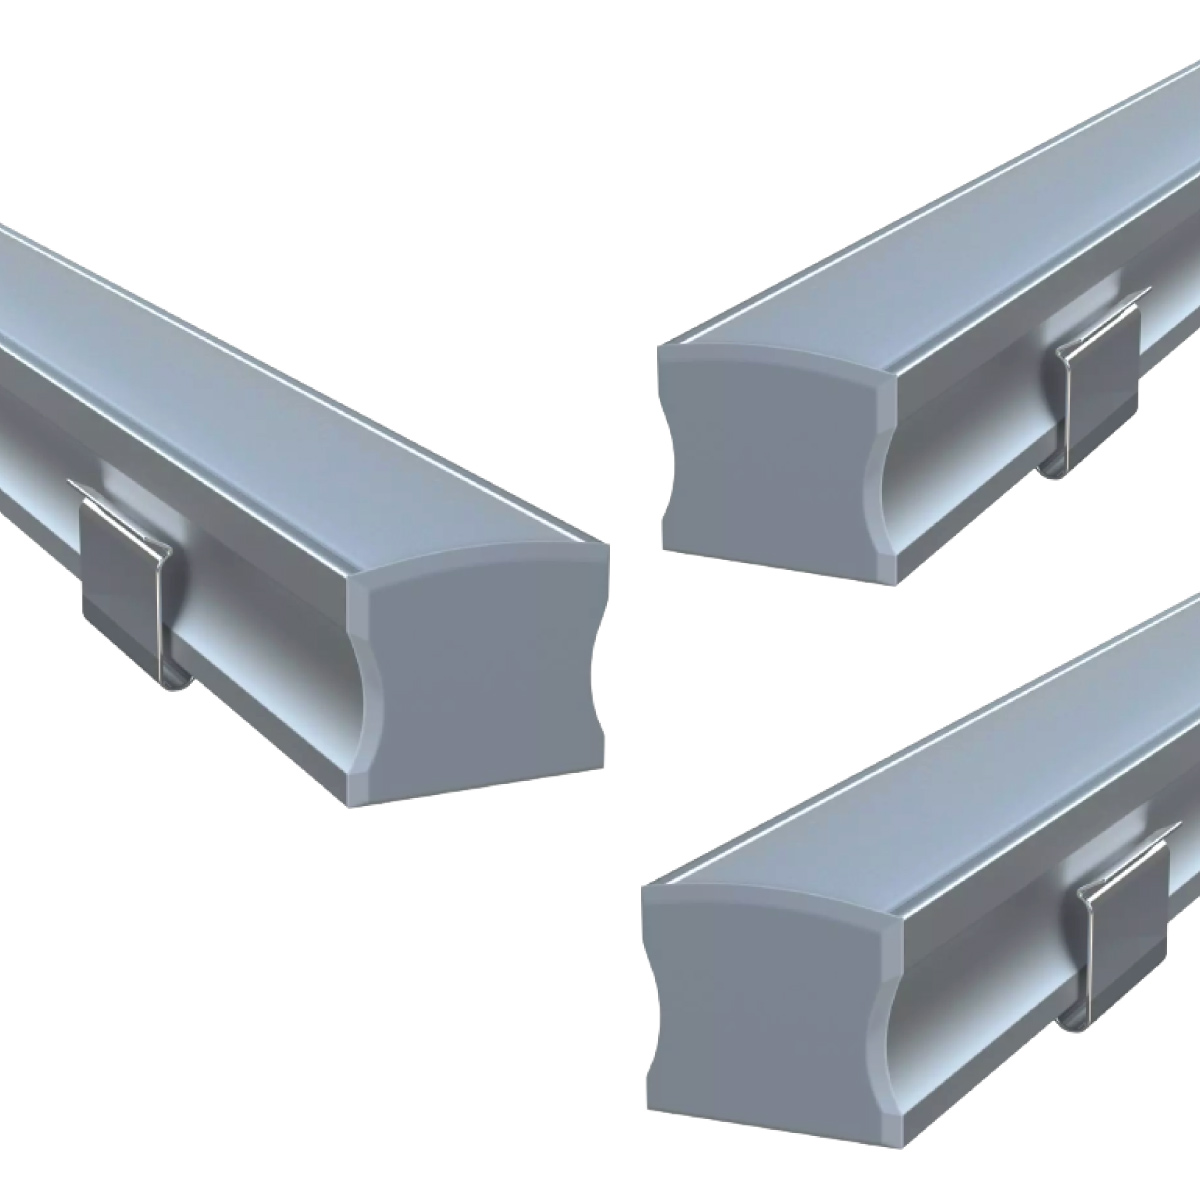 View Pack of 3 Surface Mounted Aluminium LED Profiles 15mm Deep and 2M Long information